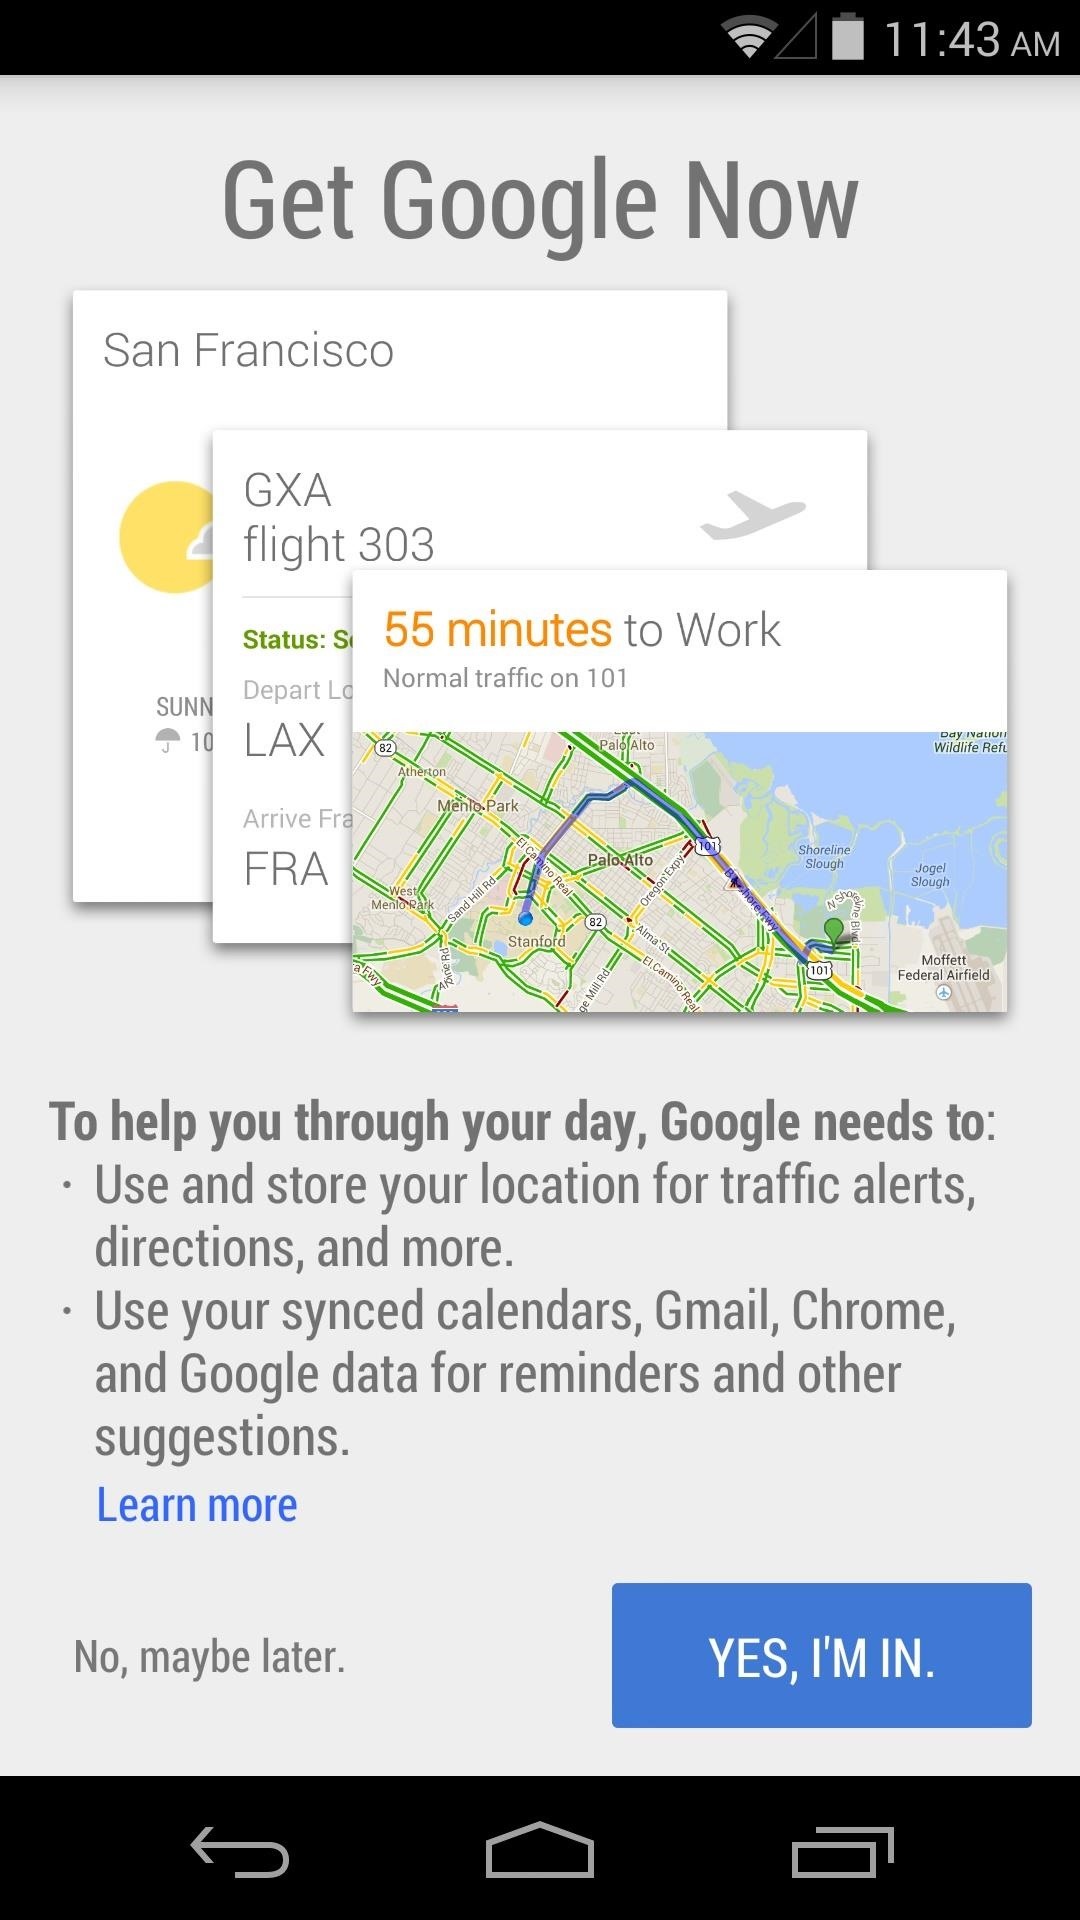 Get Auto Reminders to Pay Bills & Cancel Trial Subscriptions Using Google Now (Android & iOS)